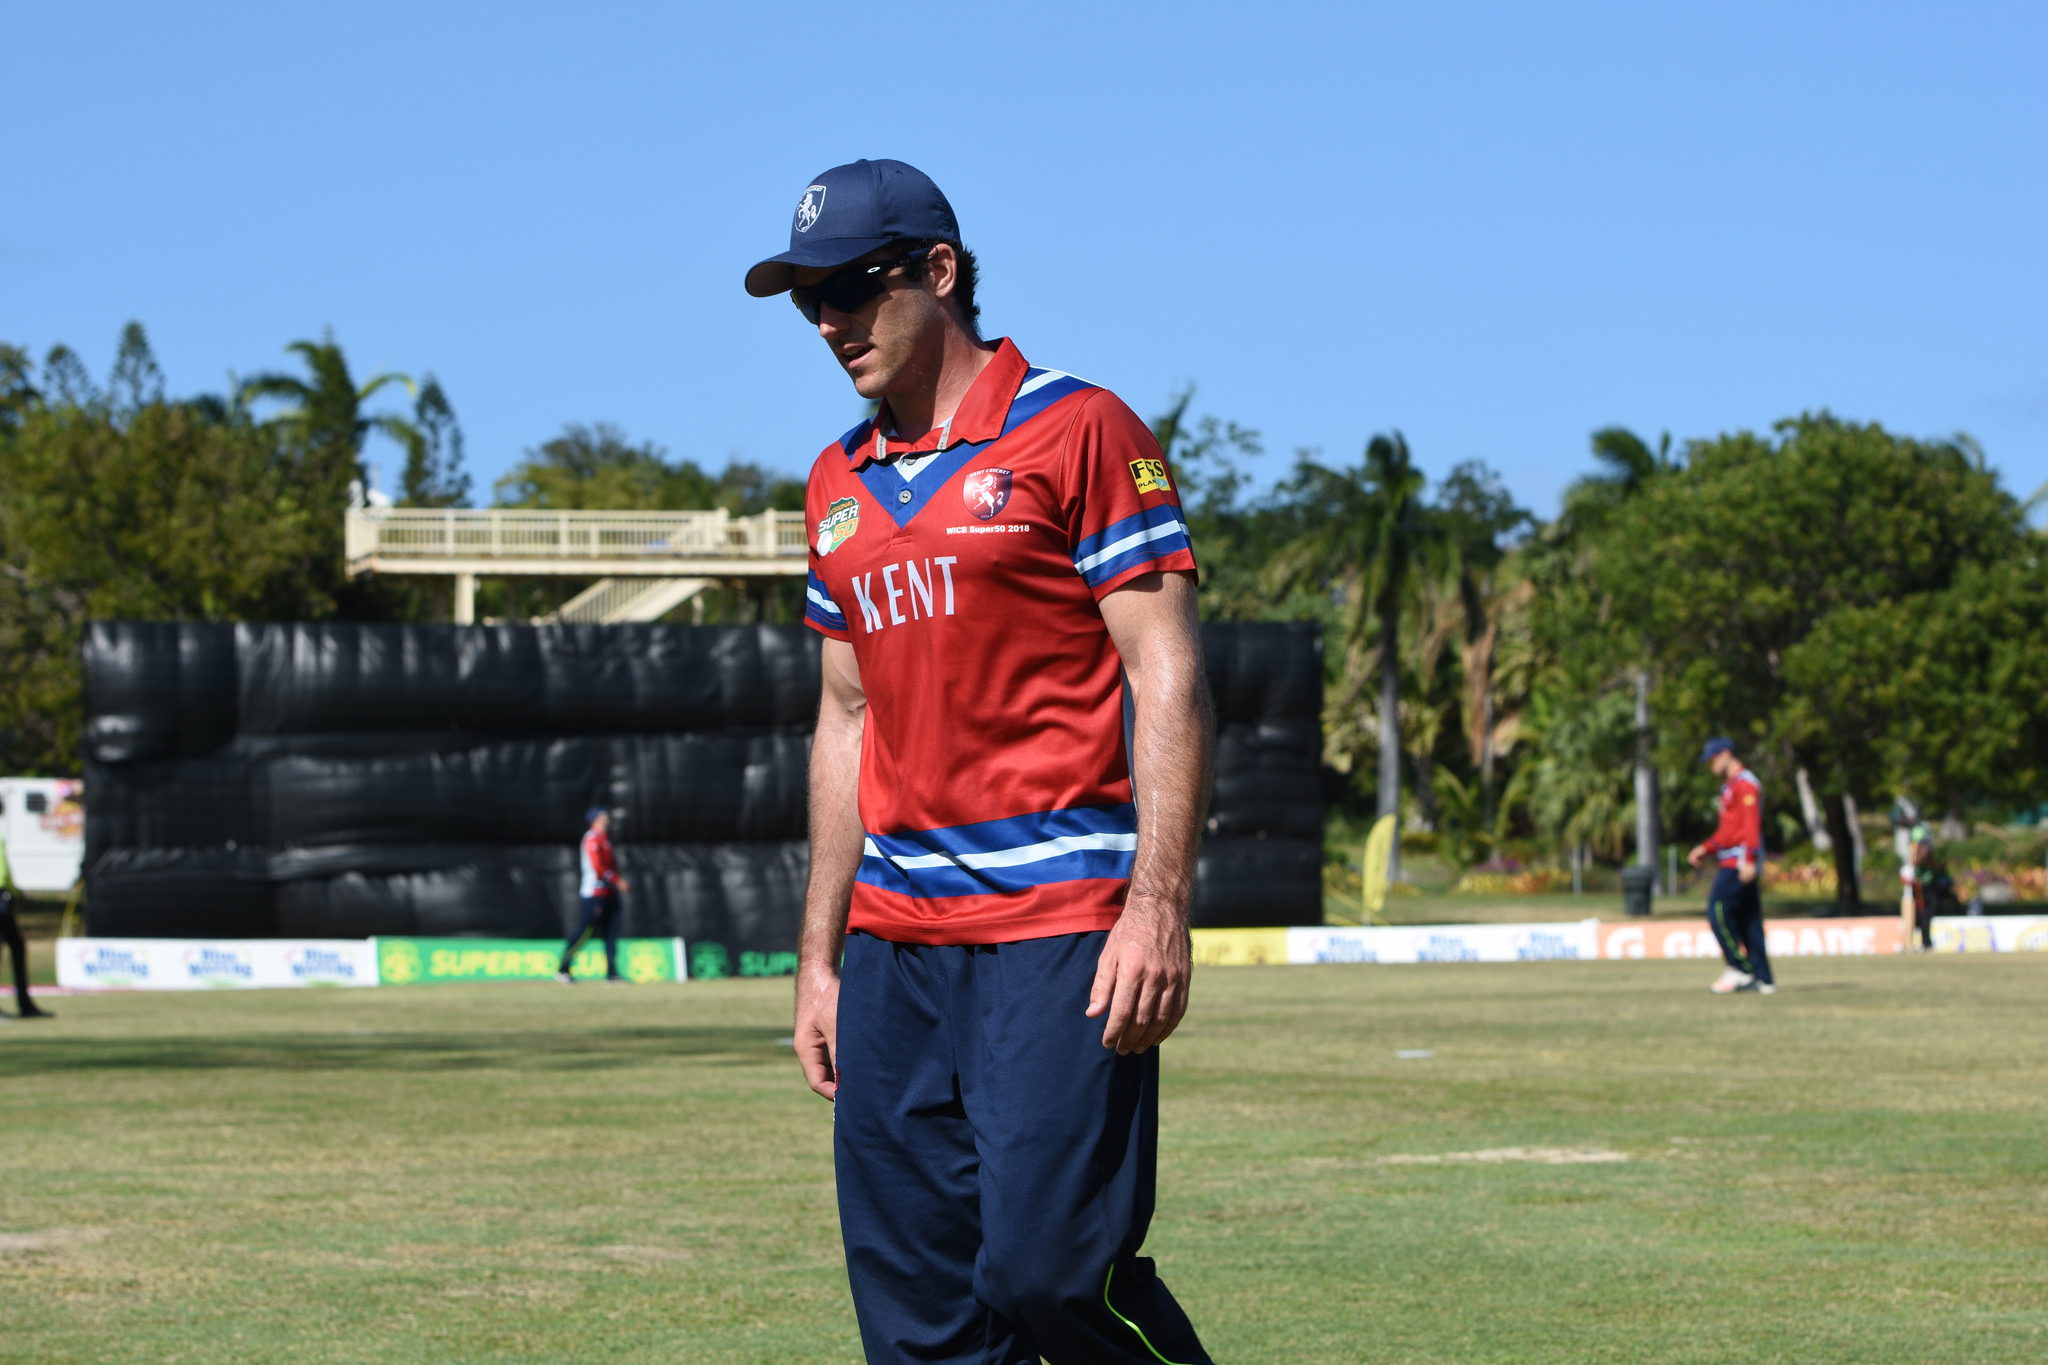 USA pipped at the post again by Kent in Super50